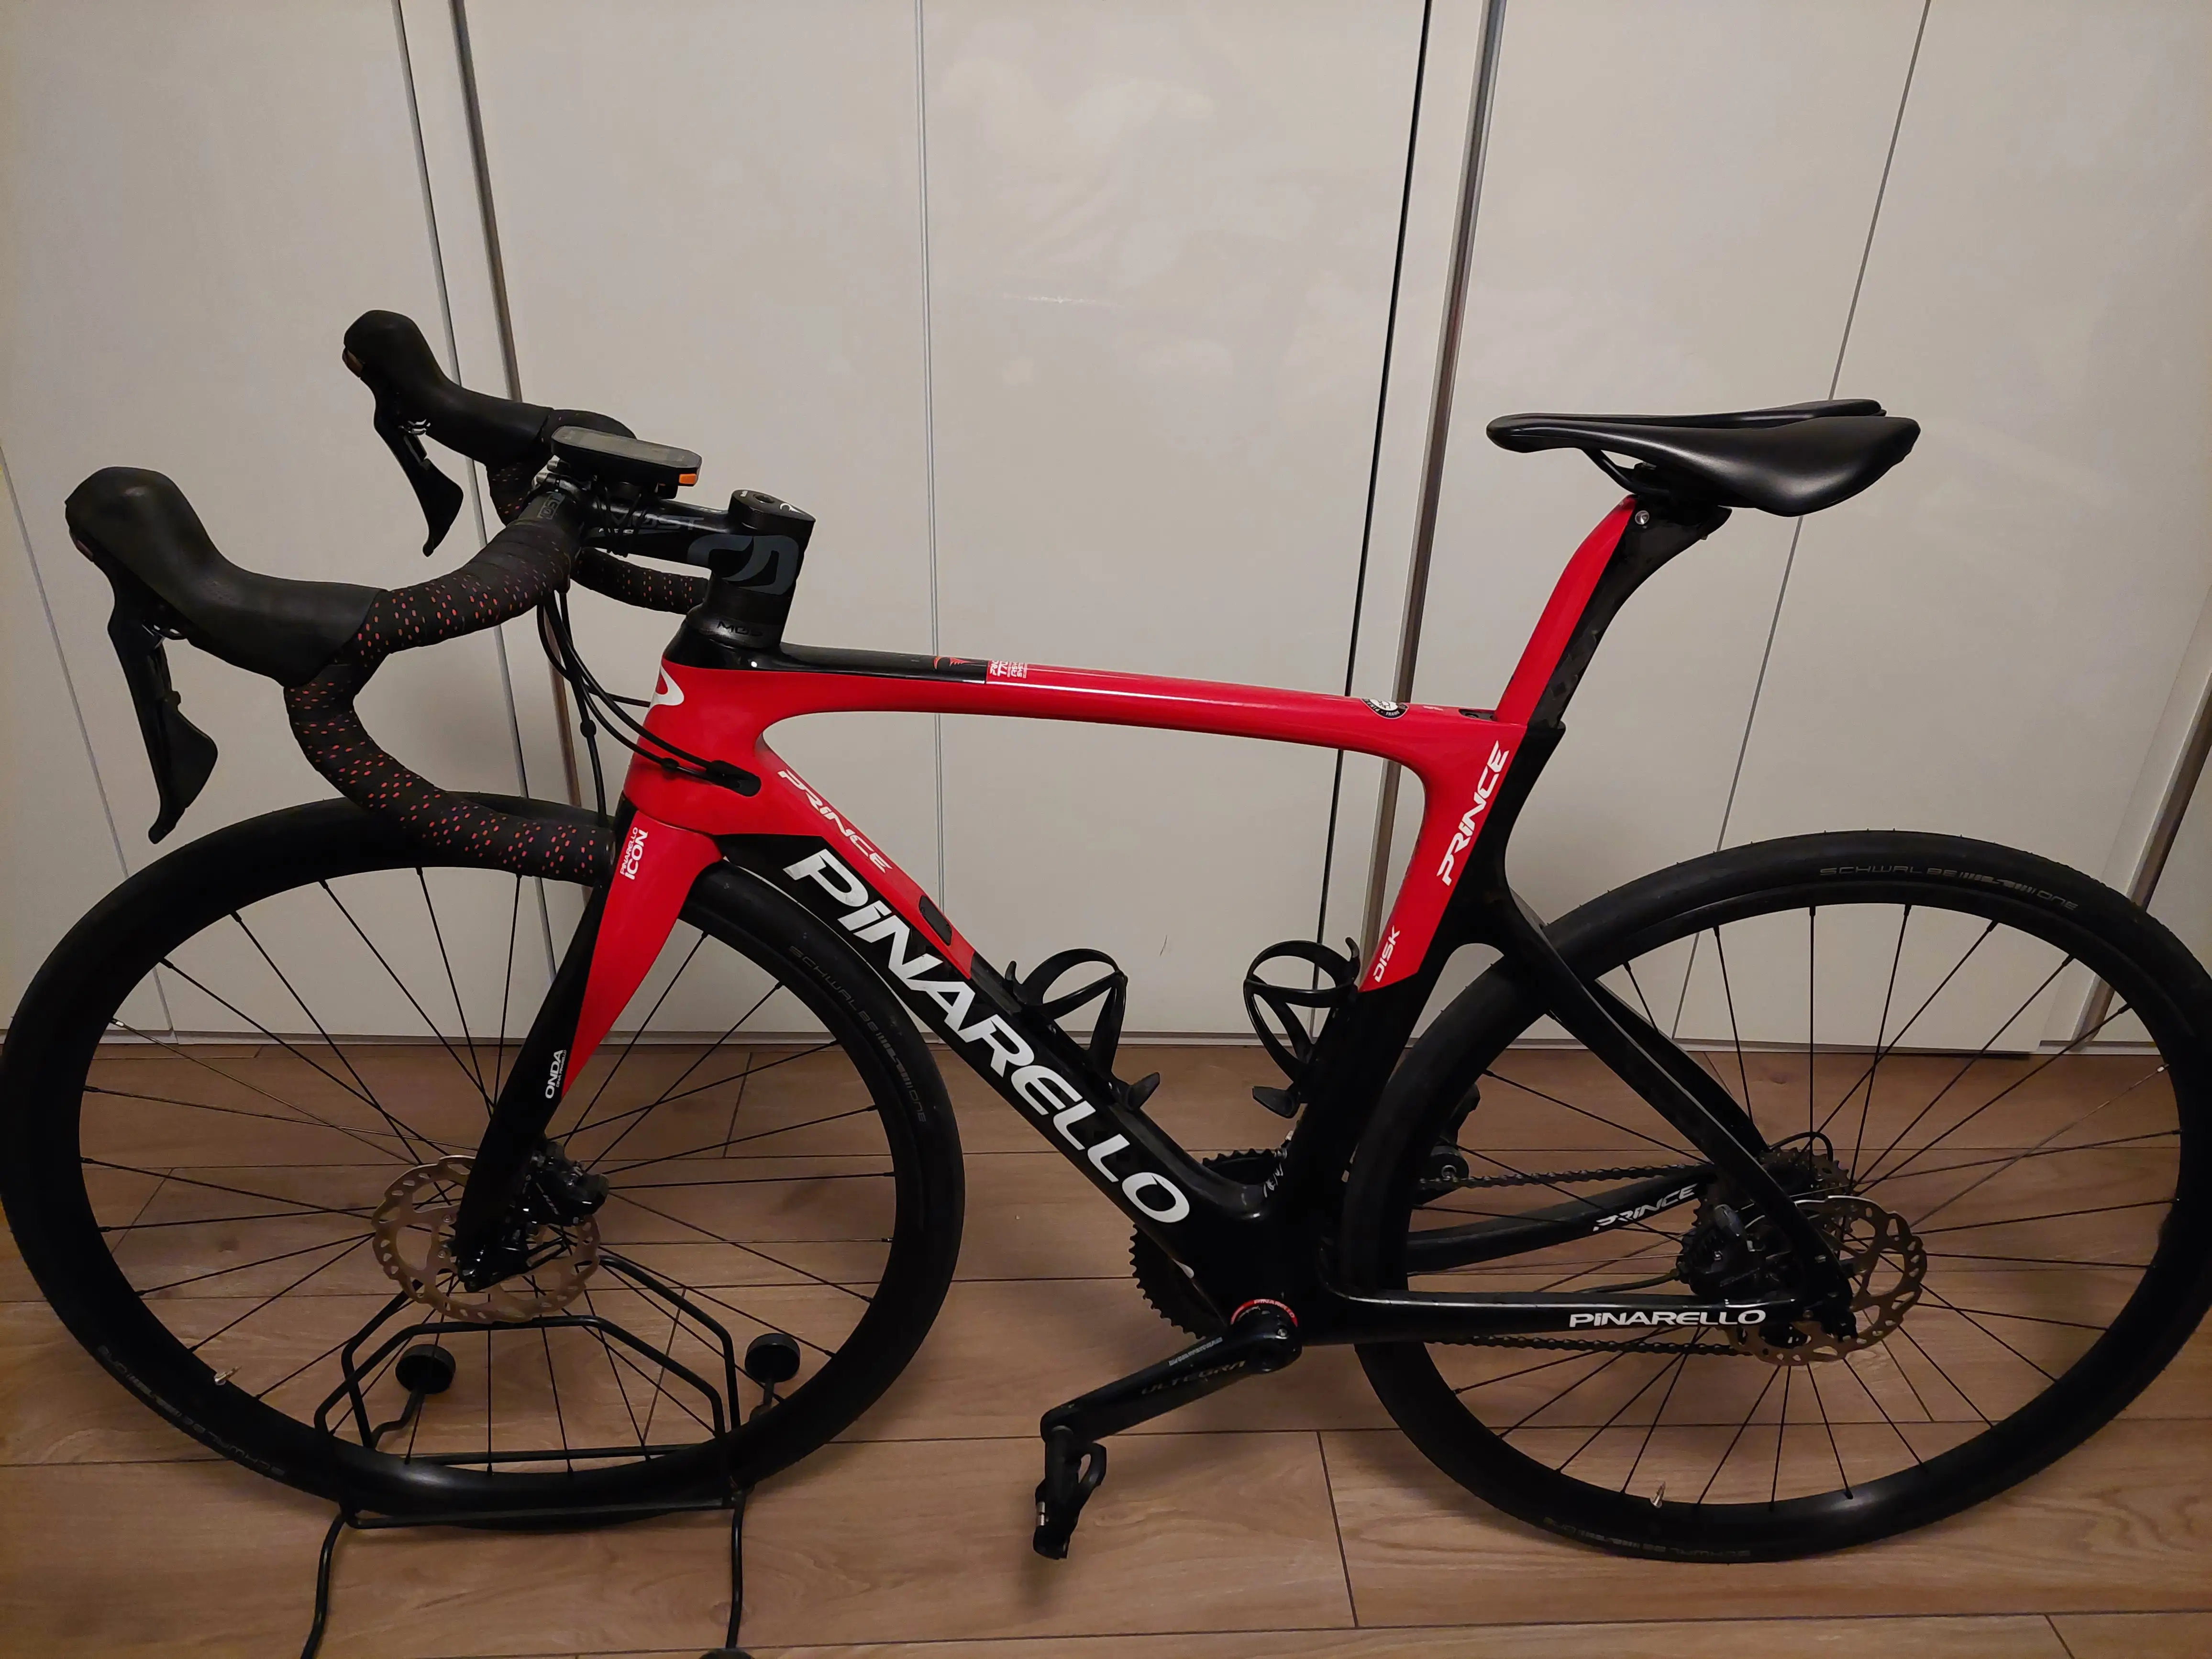 Pinarello Prince Ultegra used in m | buycycle